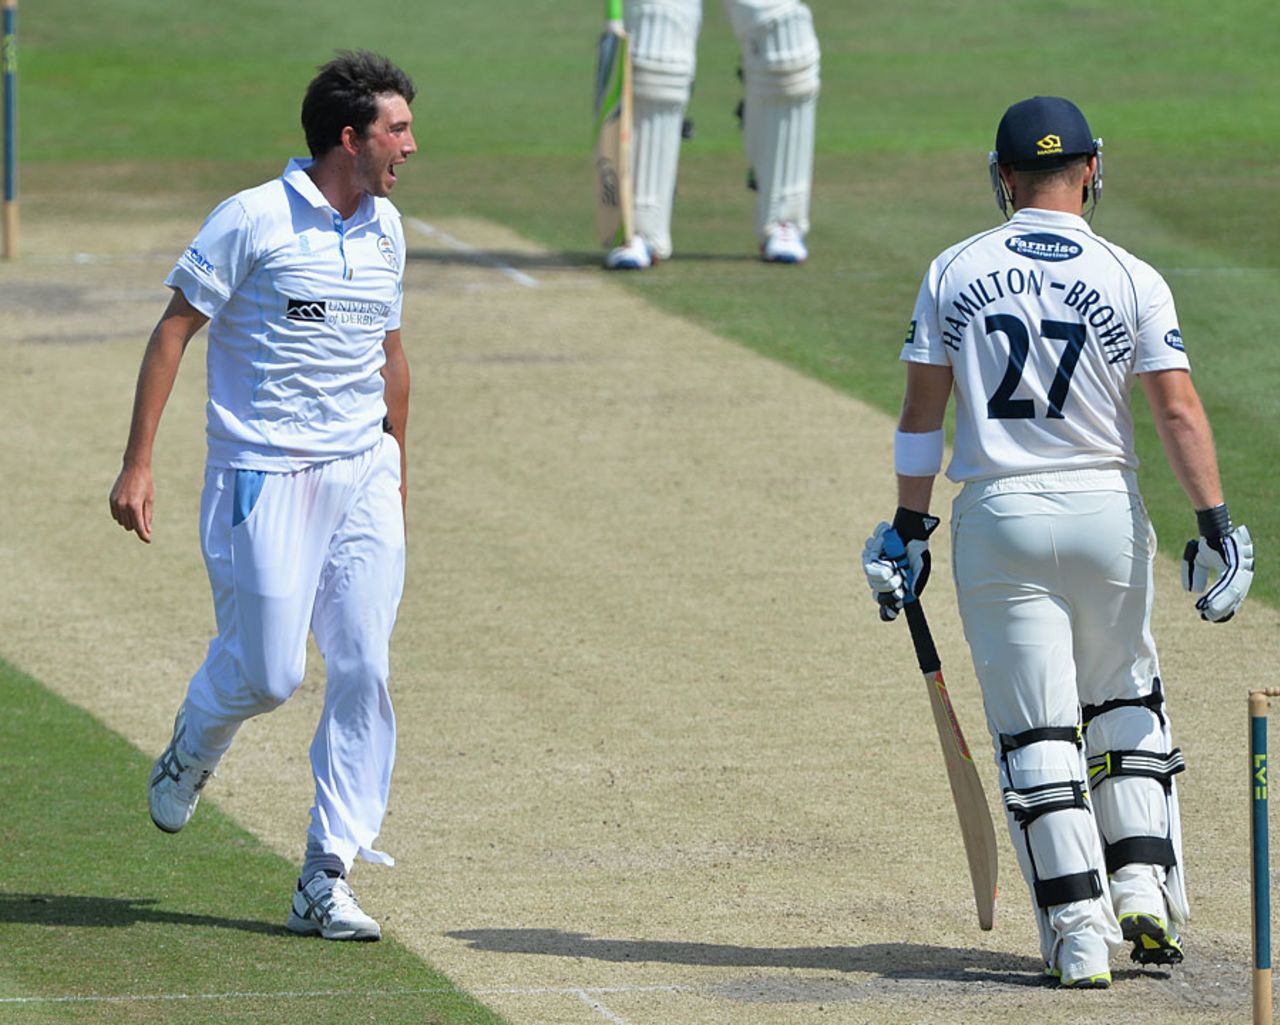 Rory Hamilton-Brown gets sent on his way, Sussex v Derbyshire, County Championship, Division One, Hove, August 4, 2013